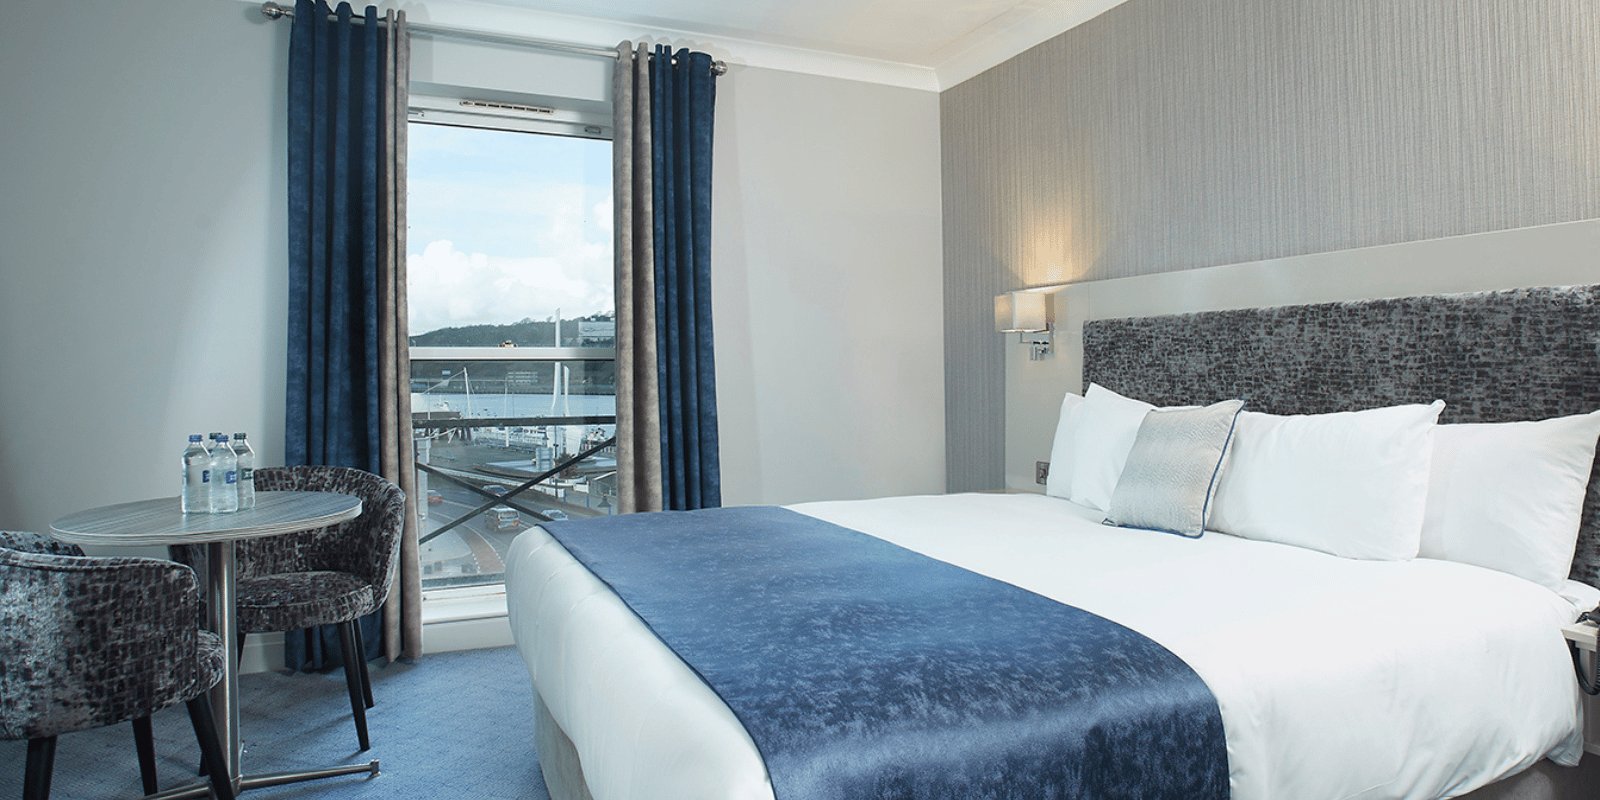 https://www.towerhotelwaterford.com/bookings.html#!/accommodation/packages?code=SPRING